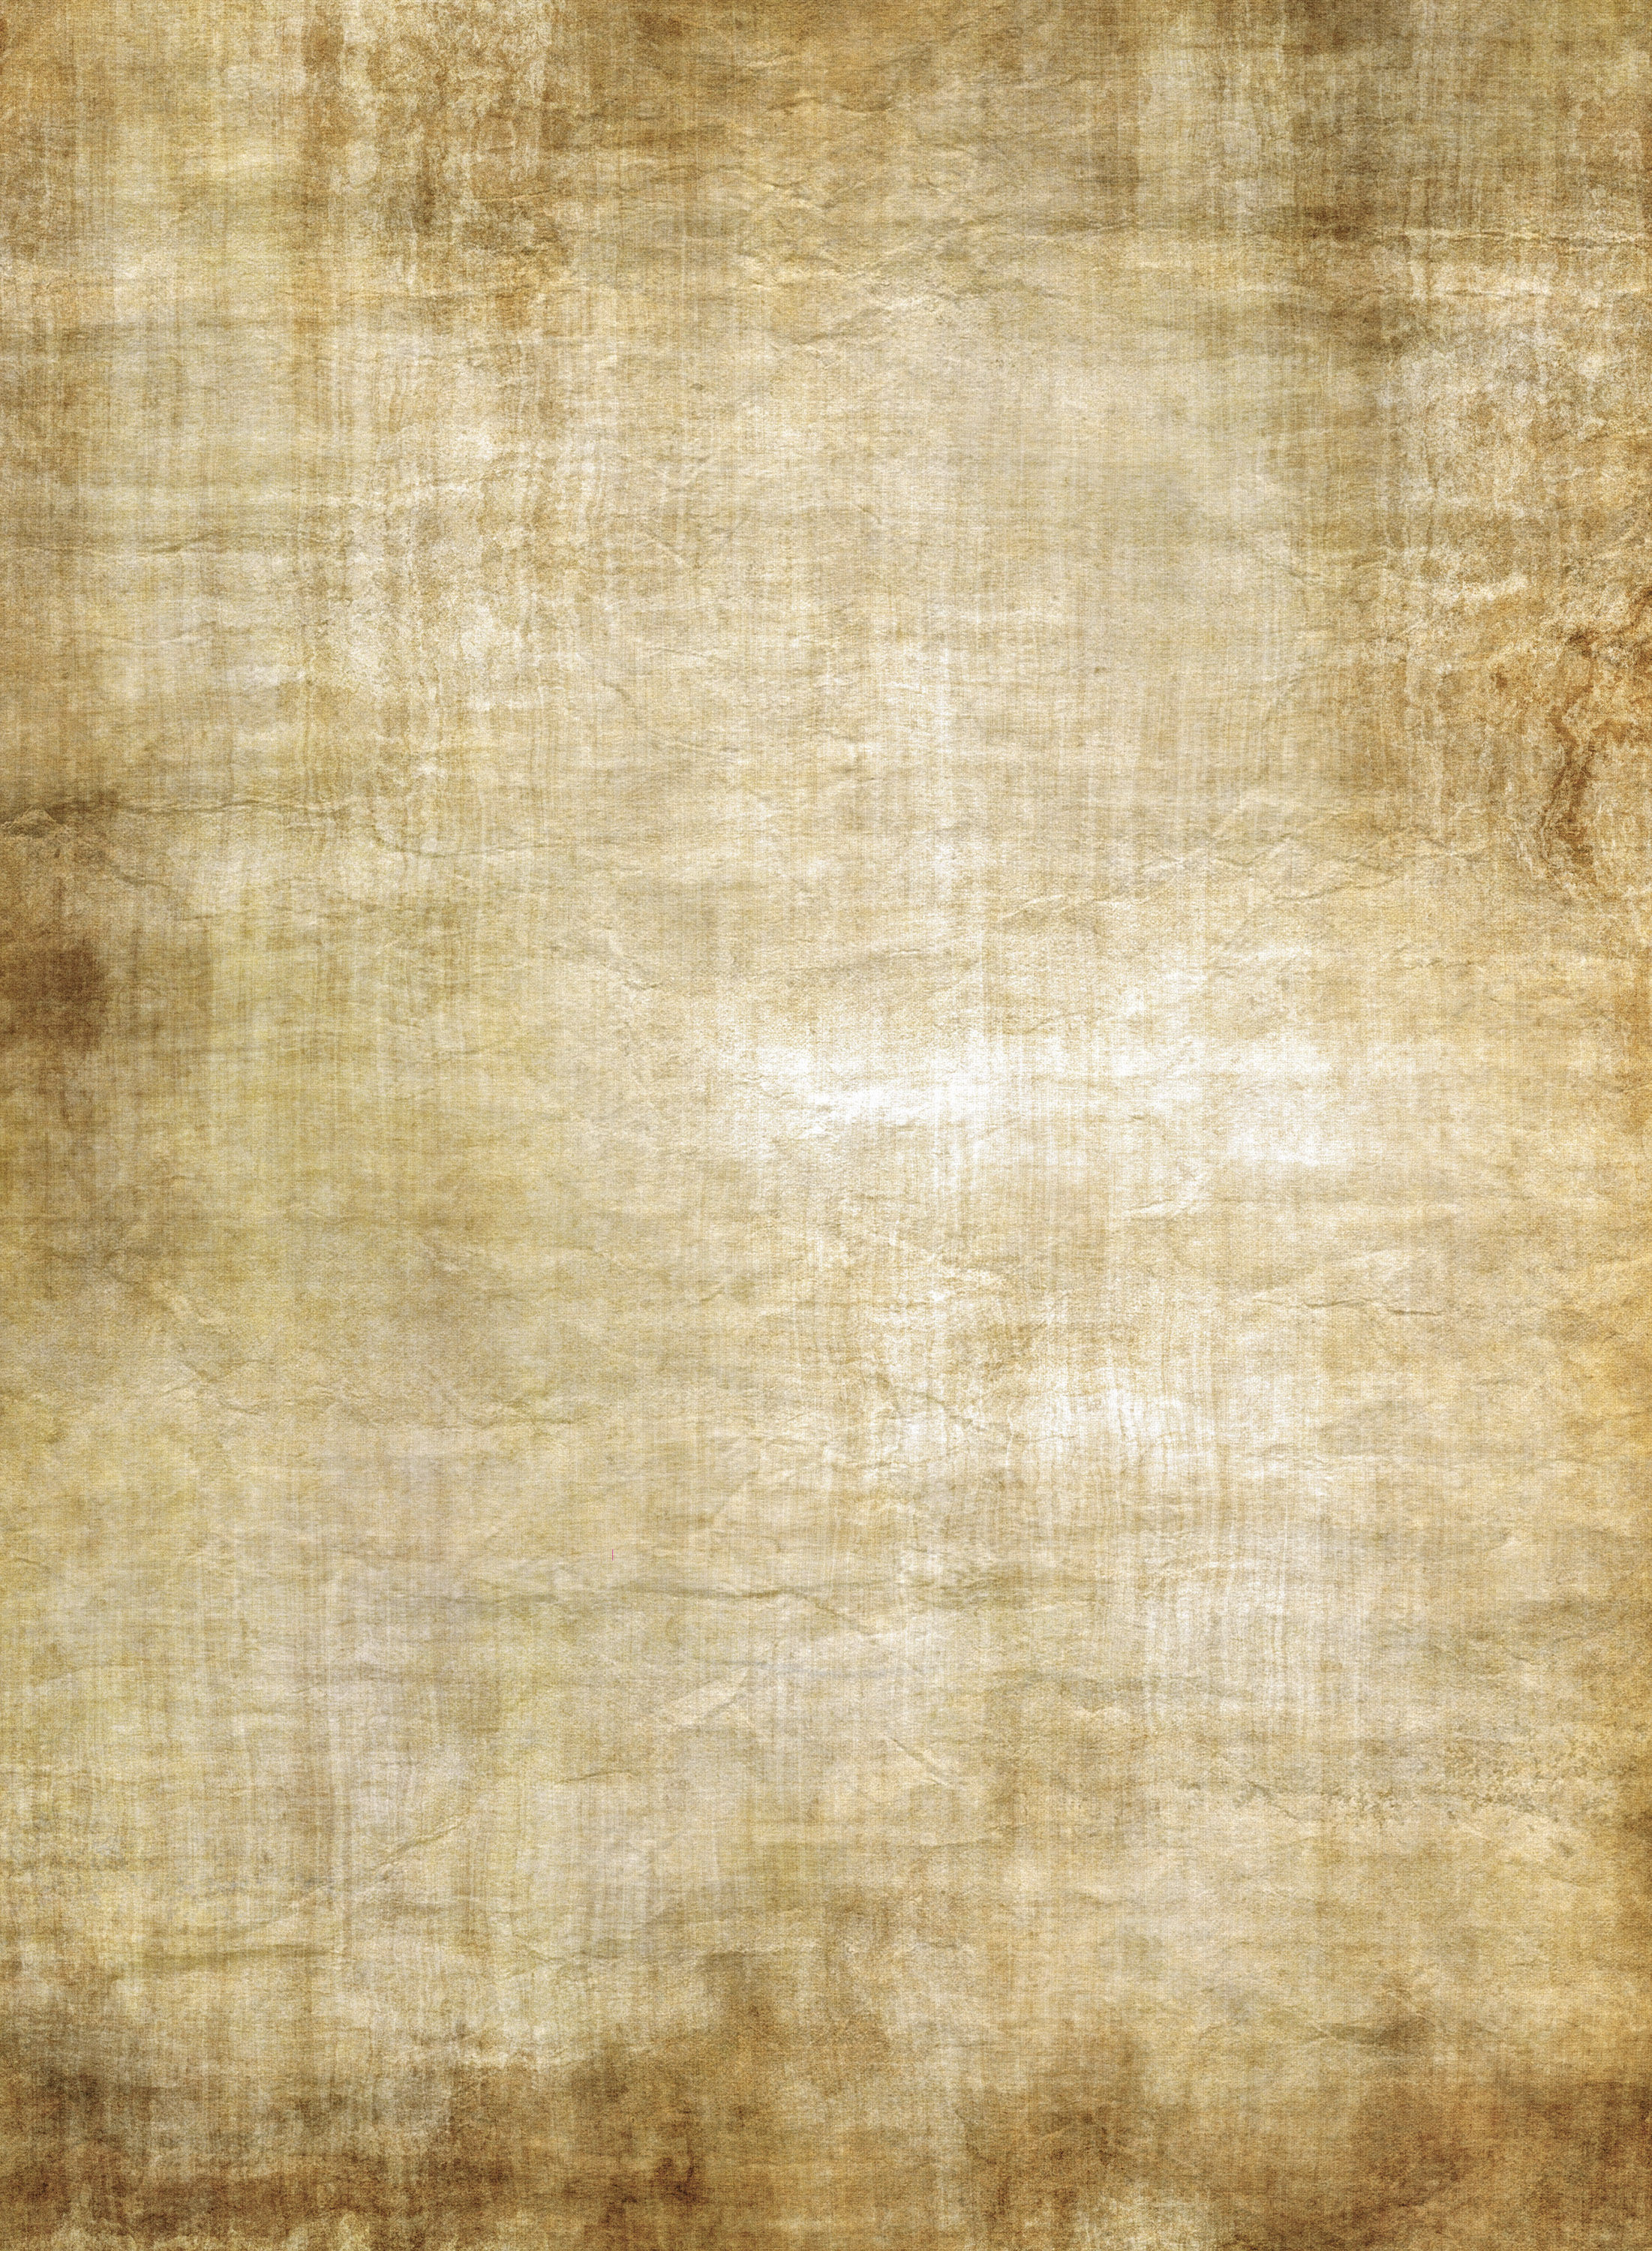 Here Is A Old Brown Parchment Paper Texture